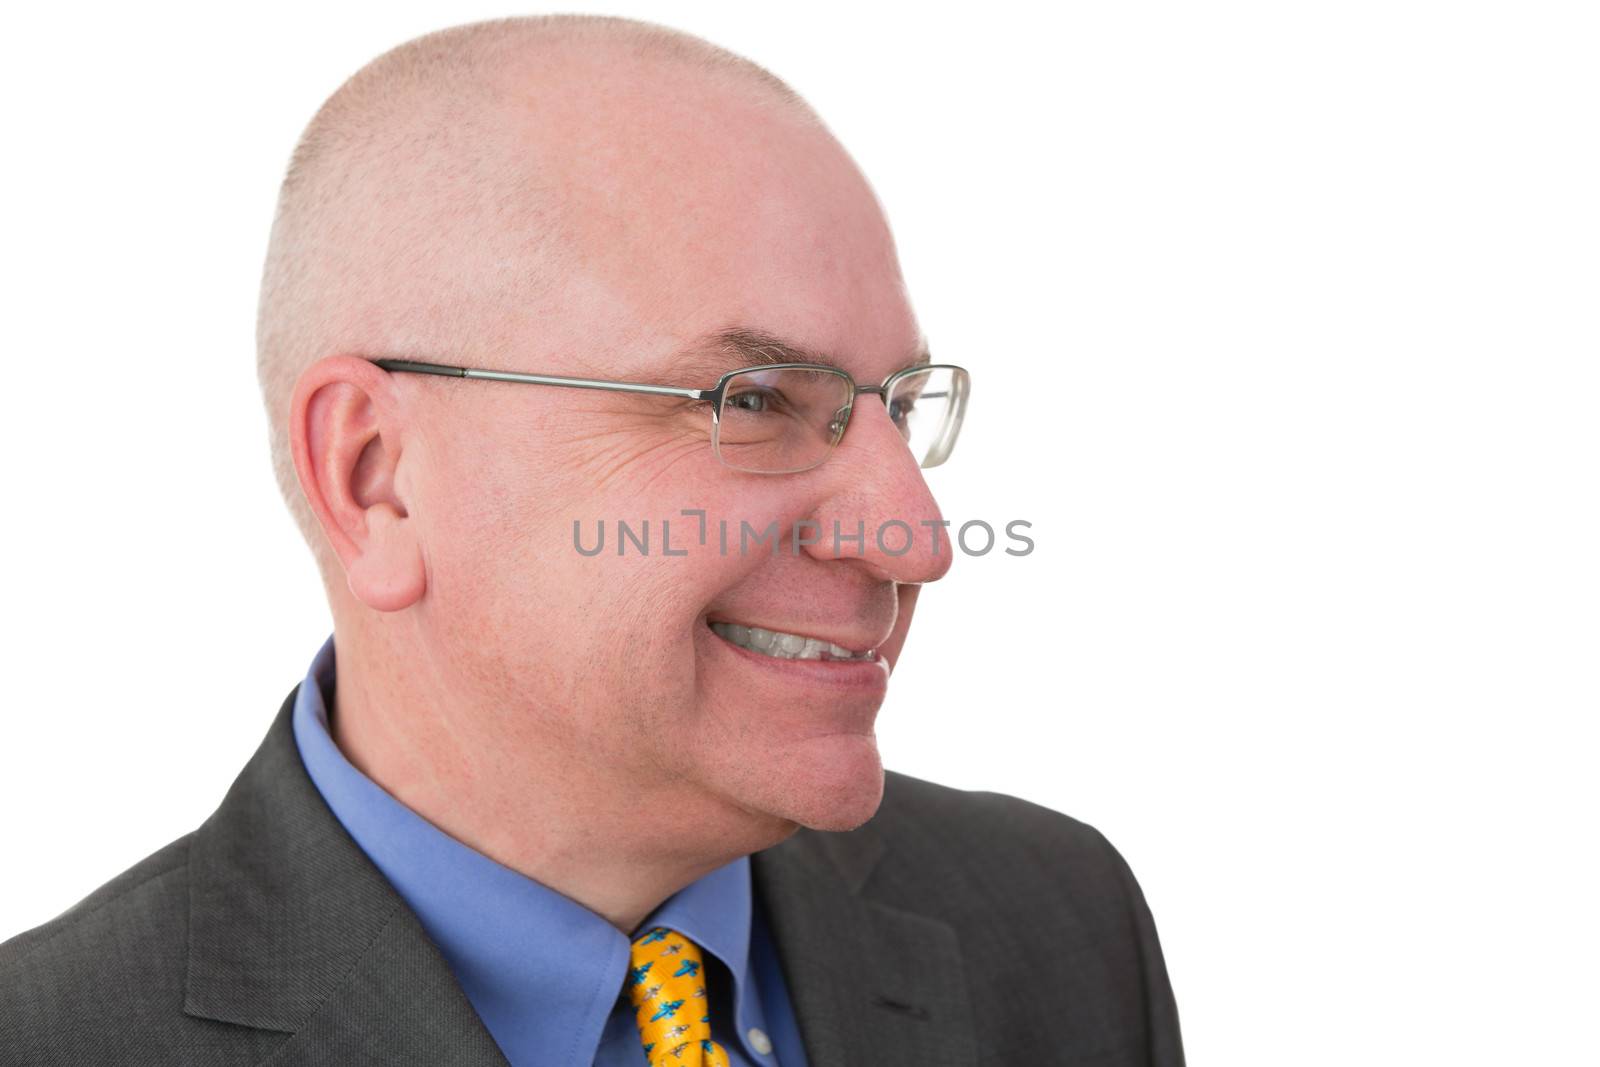 Middle-aged businessman giving a wry smile as he realises the irony of a situation, head and shoulders portrait on white with his head turned to the side